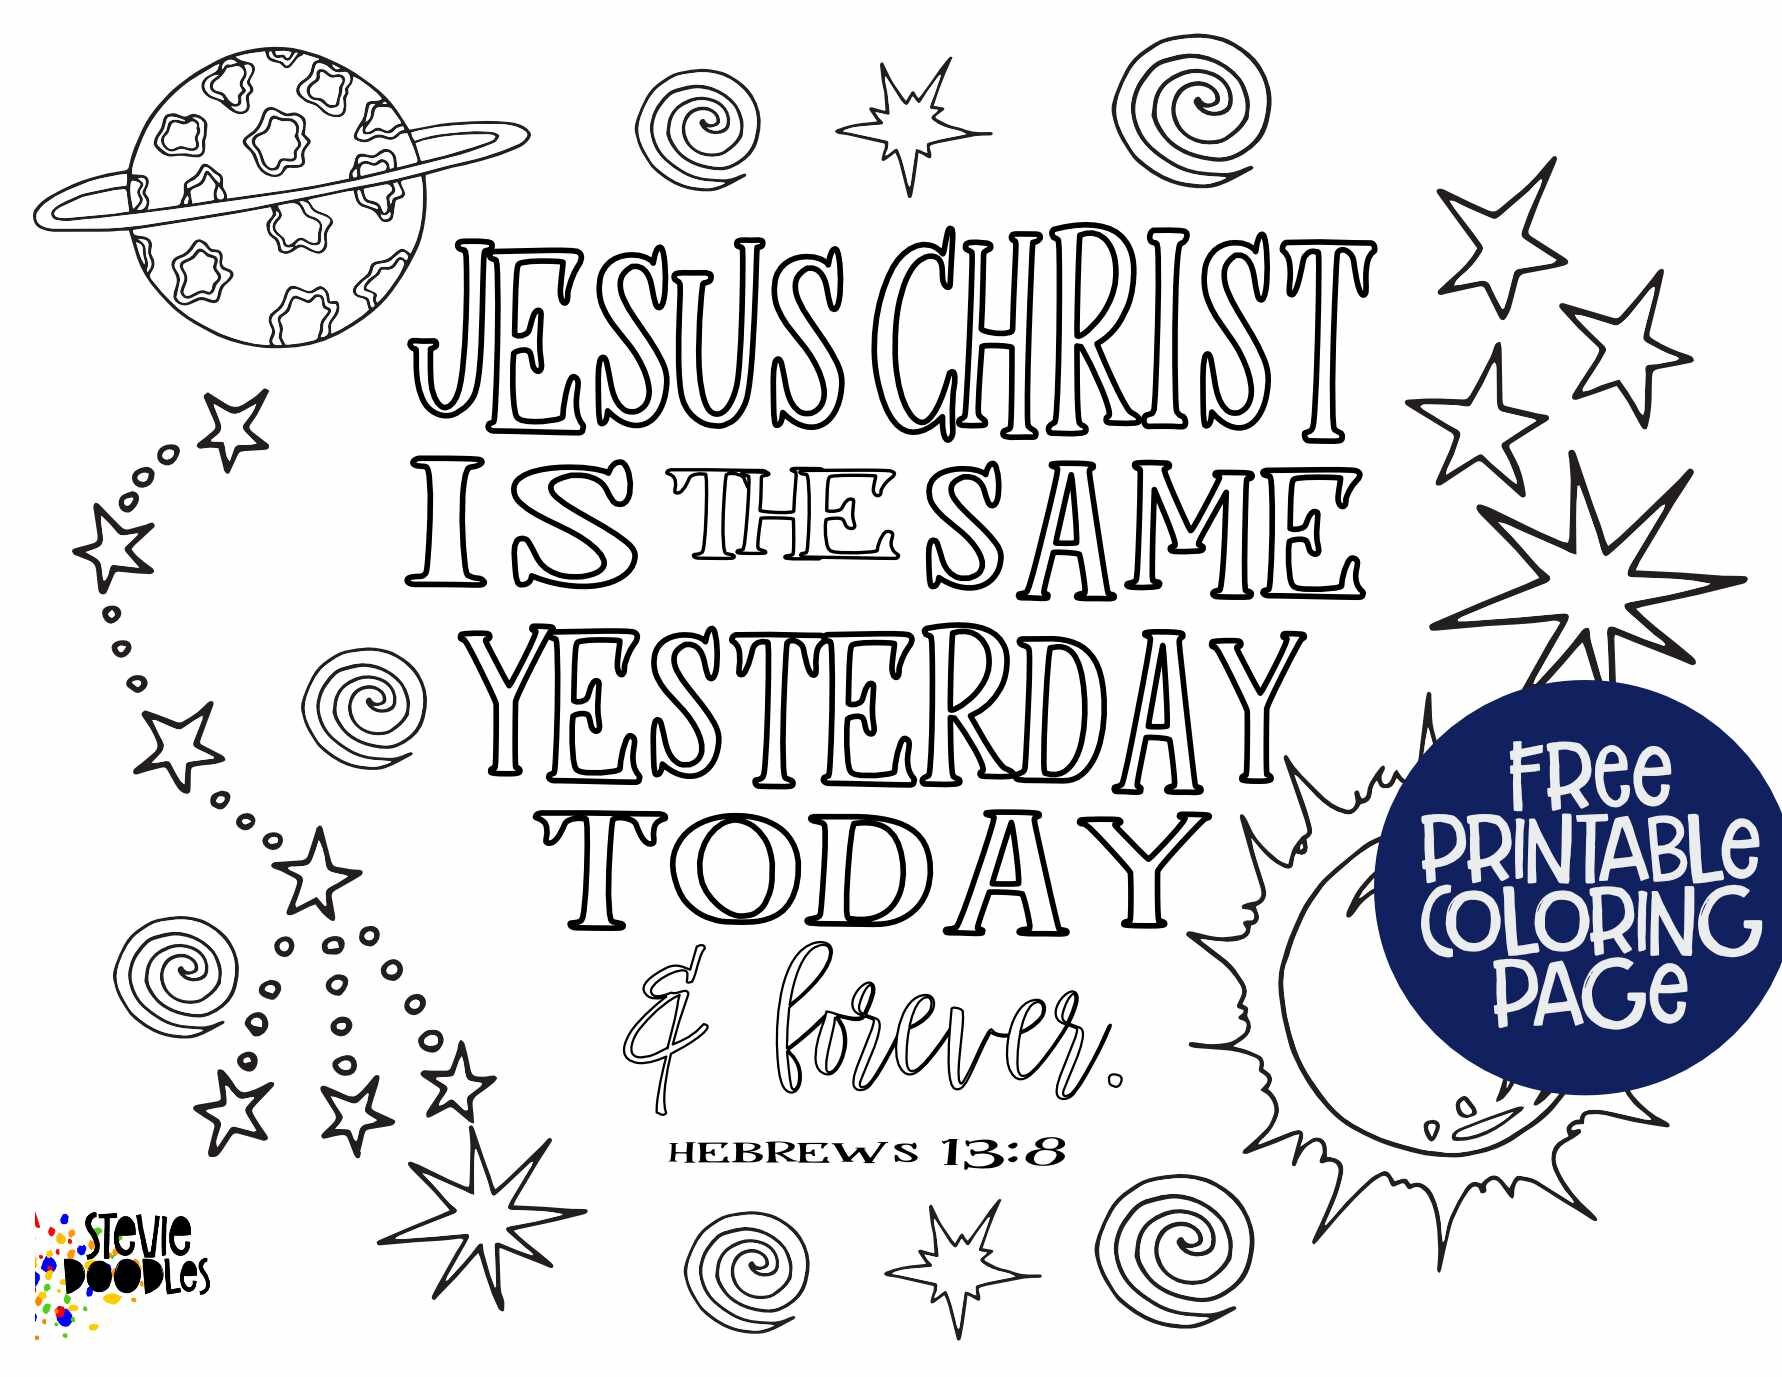 5 Free Printables! 4 Memory Verses on 1 page + each page as a separate printable coloring page Jesus Christ is the same yesterday, today, and forever - Hebrews 13:8